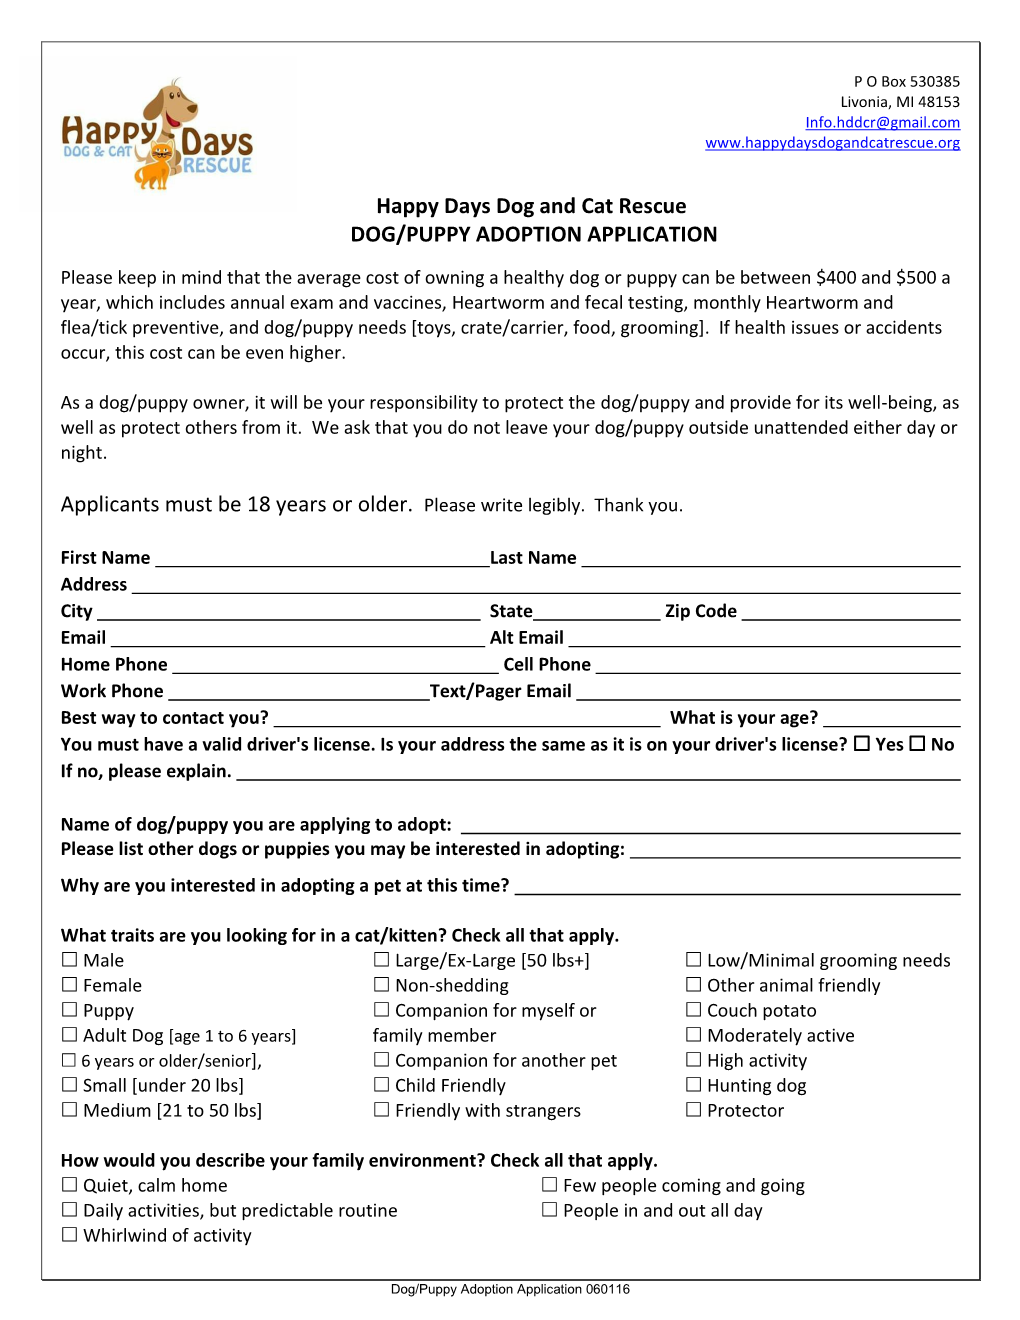 Happy Days Dog and Cat Rescue DOG/PUPPY ADOPTION APPLICATION